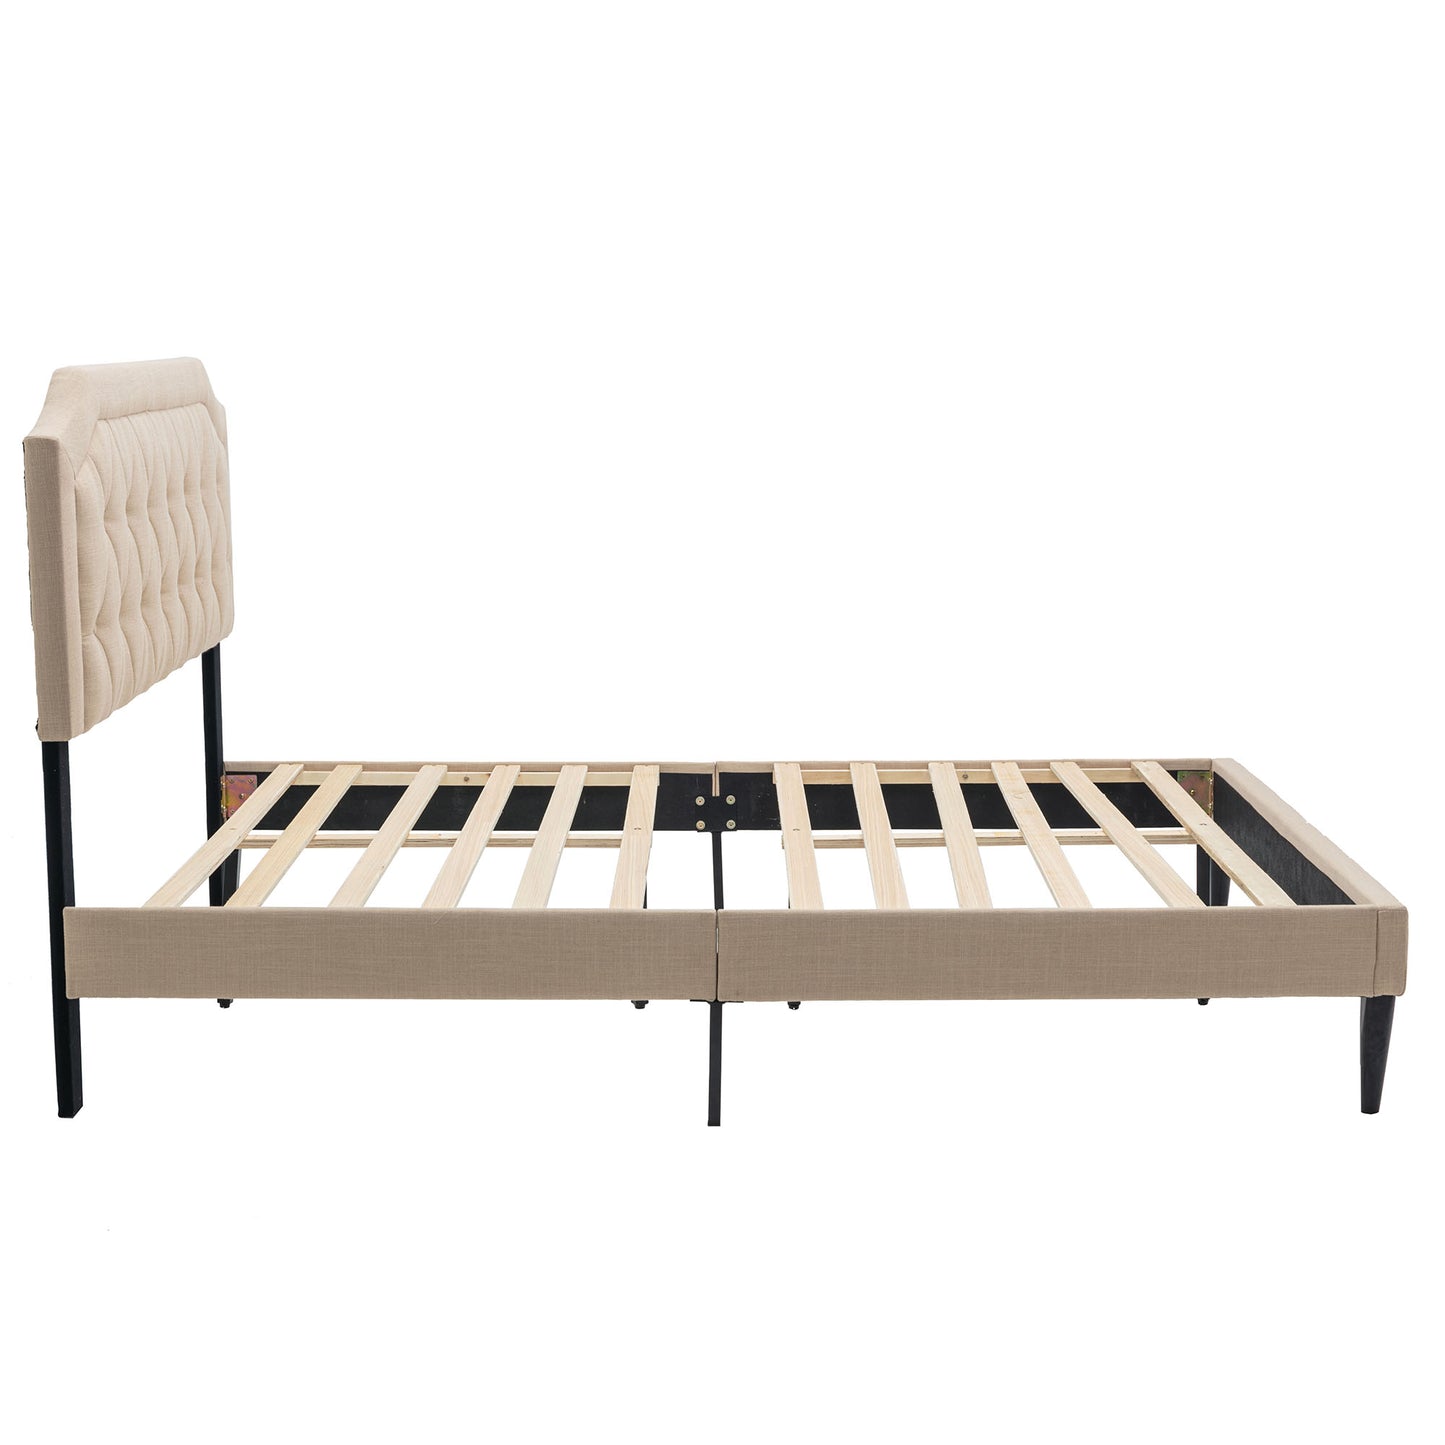 SYNGAR Queen Size Platform Bed Frame with Linen Fabric Upholstered Headboard, Button Tufted, Sturdy Frame and Strong Wooden Slats, No Box Spring Needed, Beige